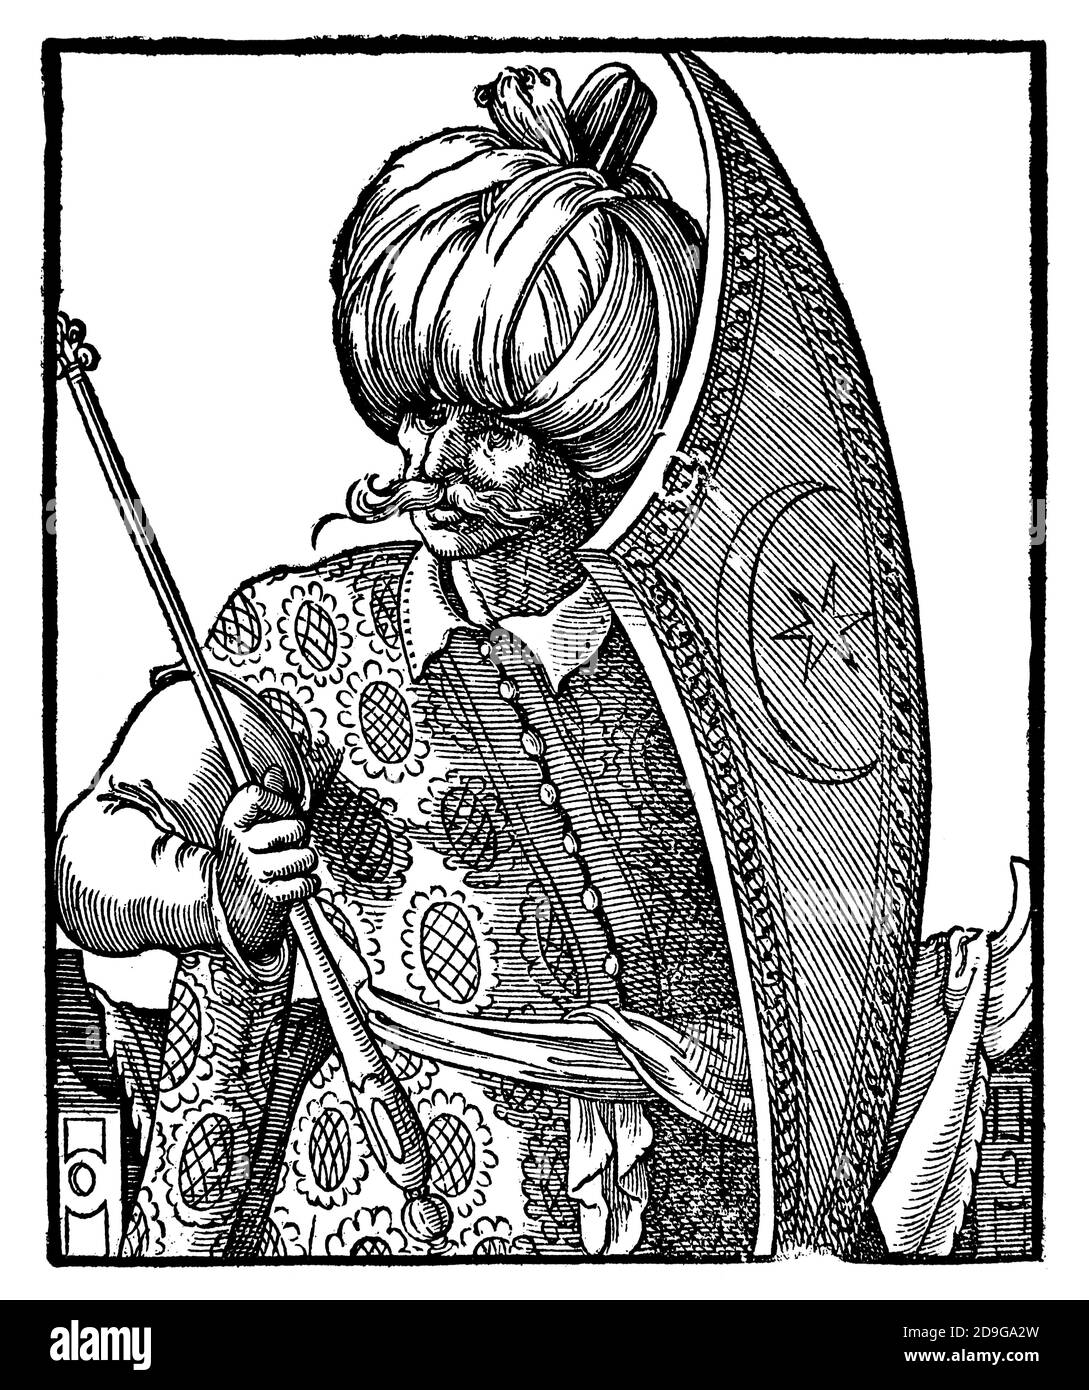 Modern era. Ottoman Empire. 16th century. Turk with shield and scepter. Engraving by Jost Amman, 16th century. Stock Photo